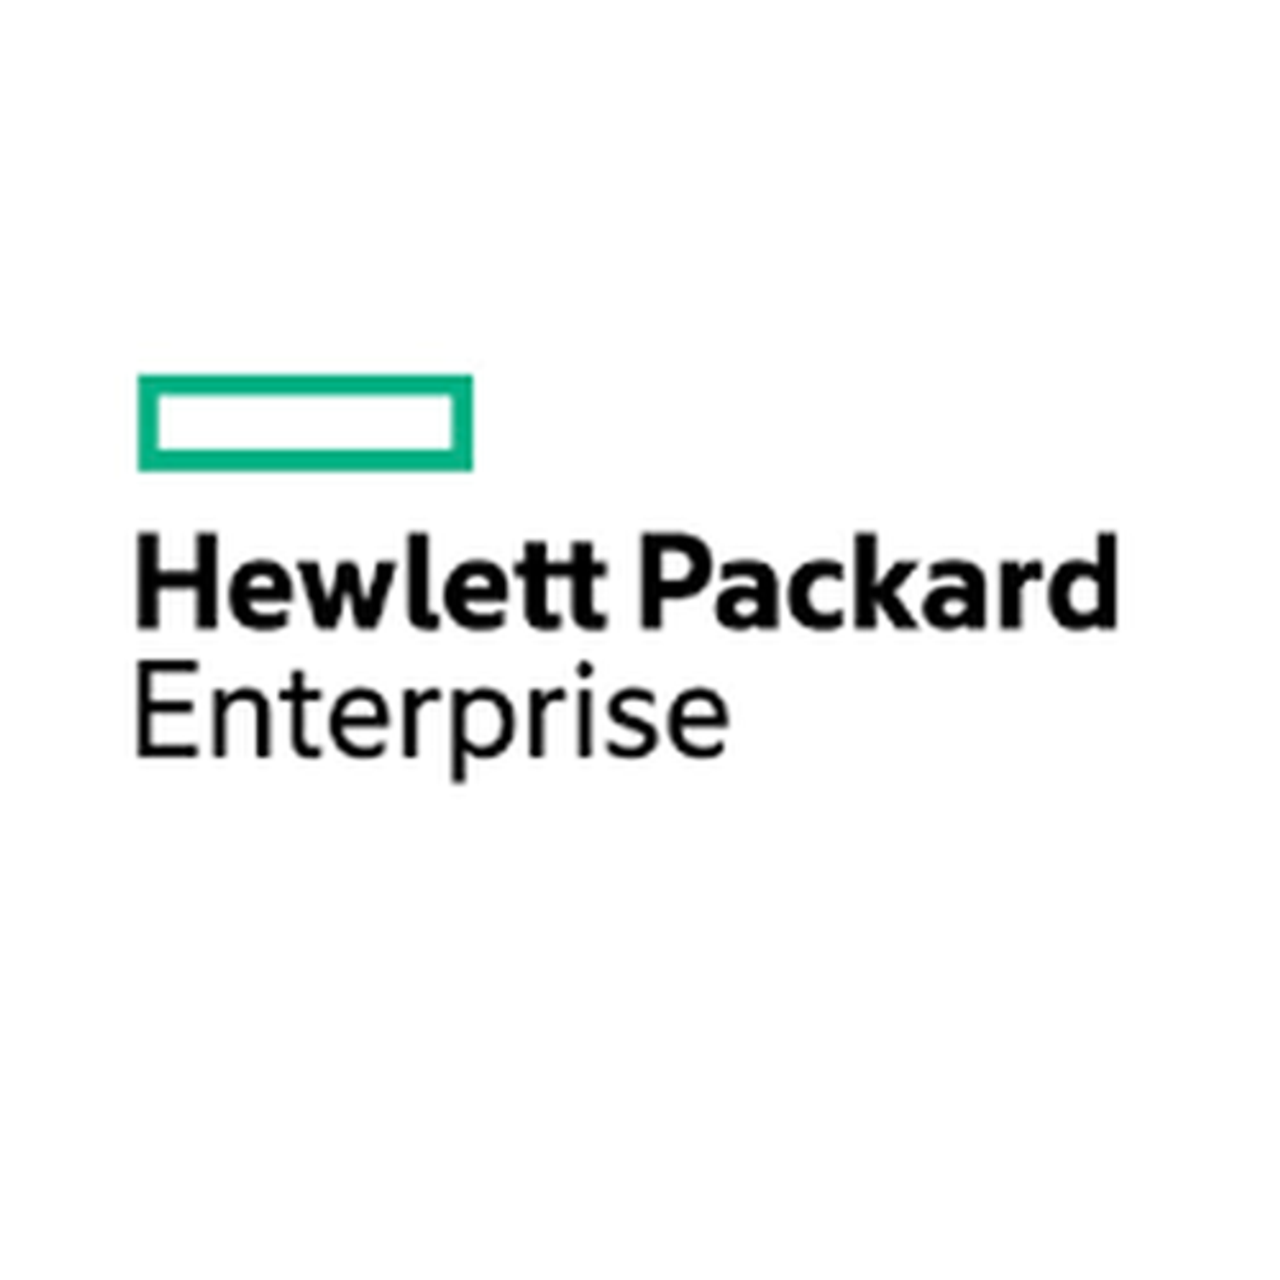 HPE DL325 Gen10+ Reman CTO Server Asia Pacific-English Localization (HSSL Sourcing) - HPE Discontinued Product)